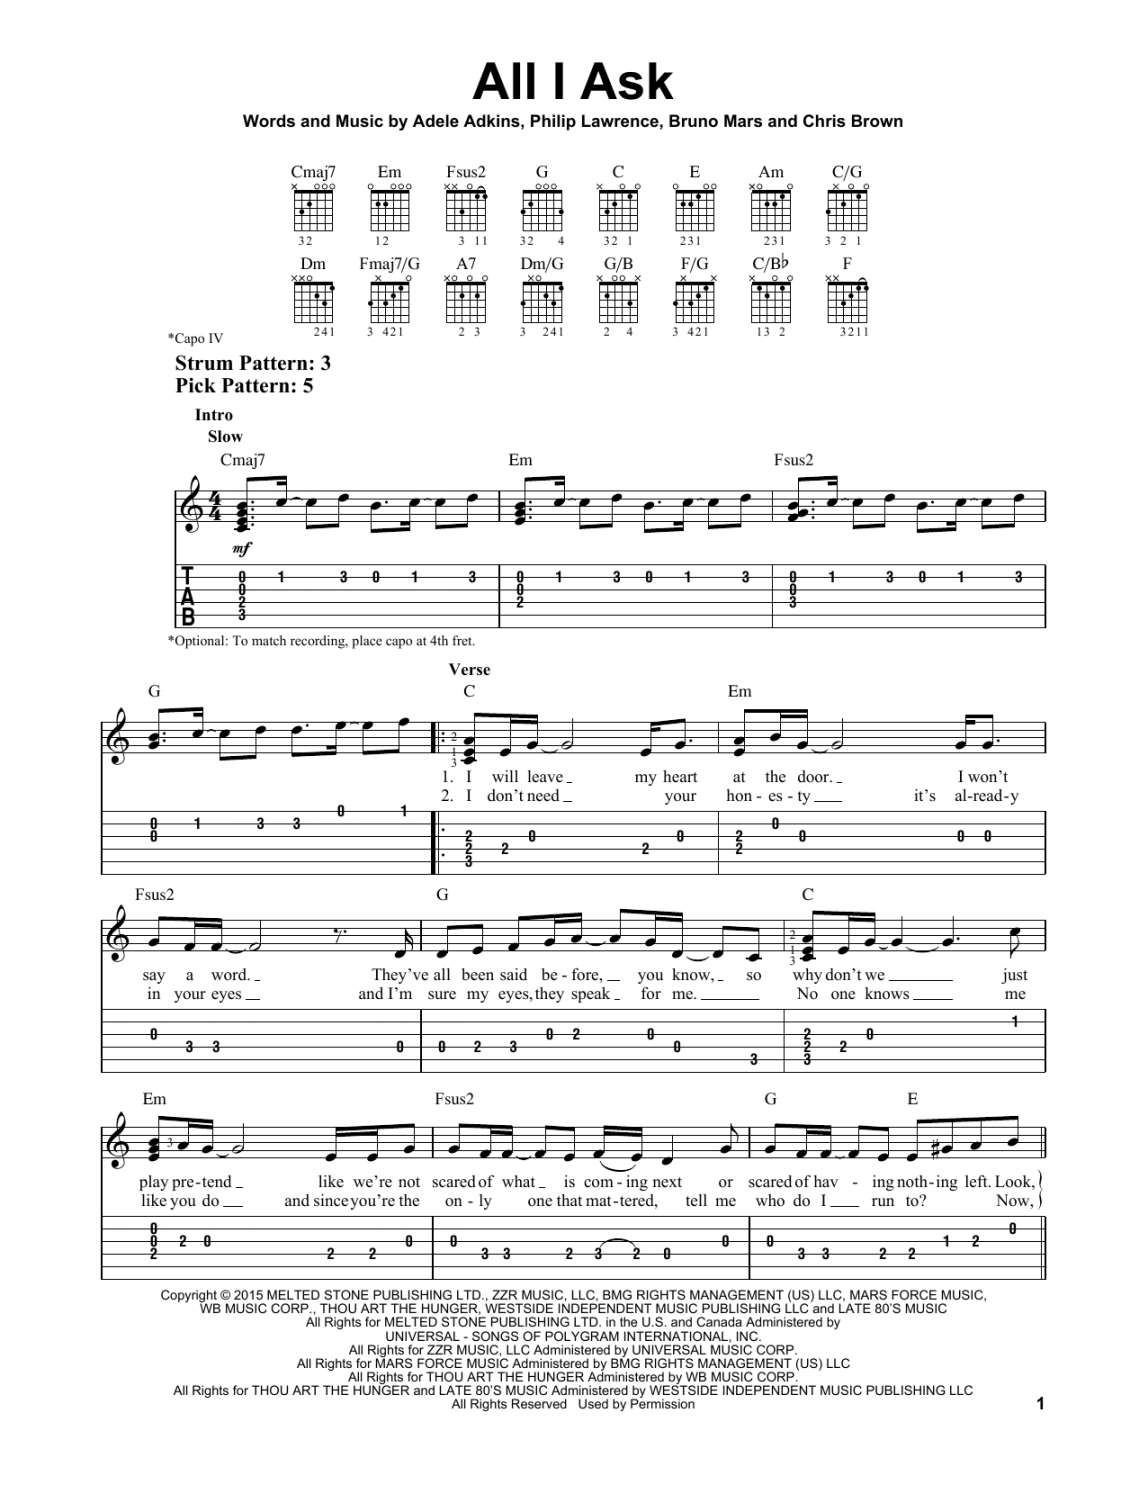 All I Ask by Adele - Easy Guitar Tab - Guitar Instructor